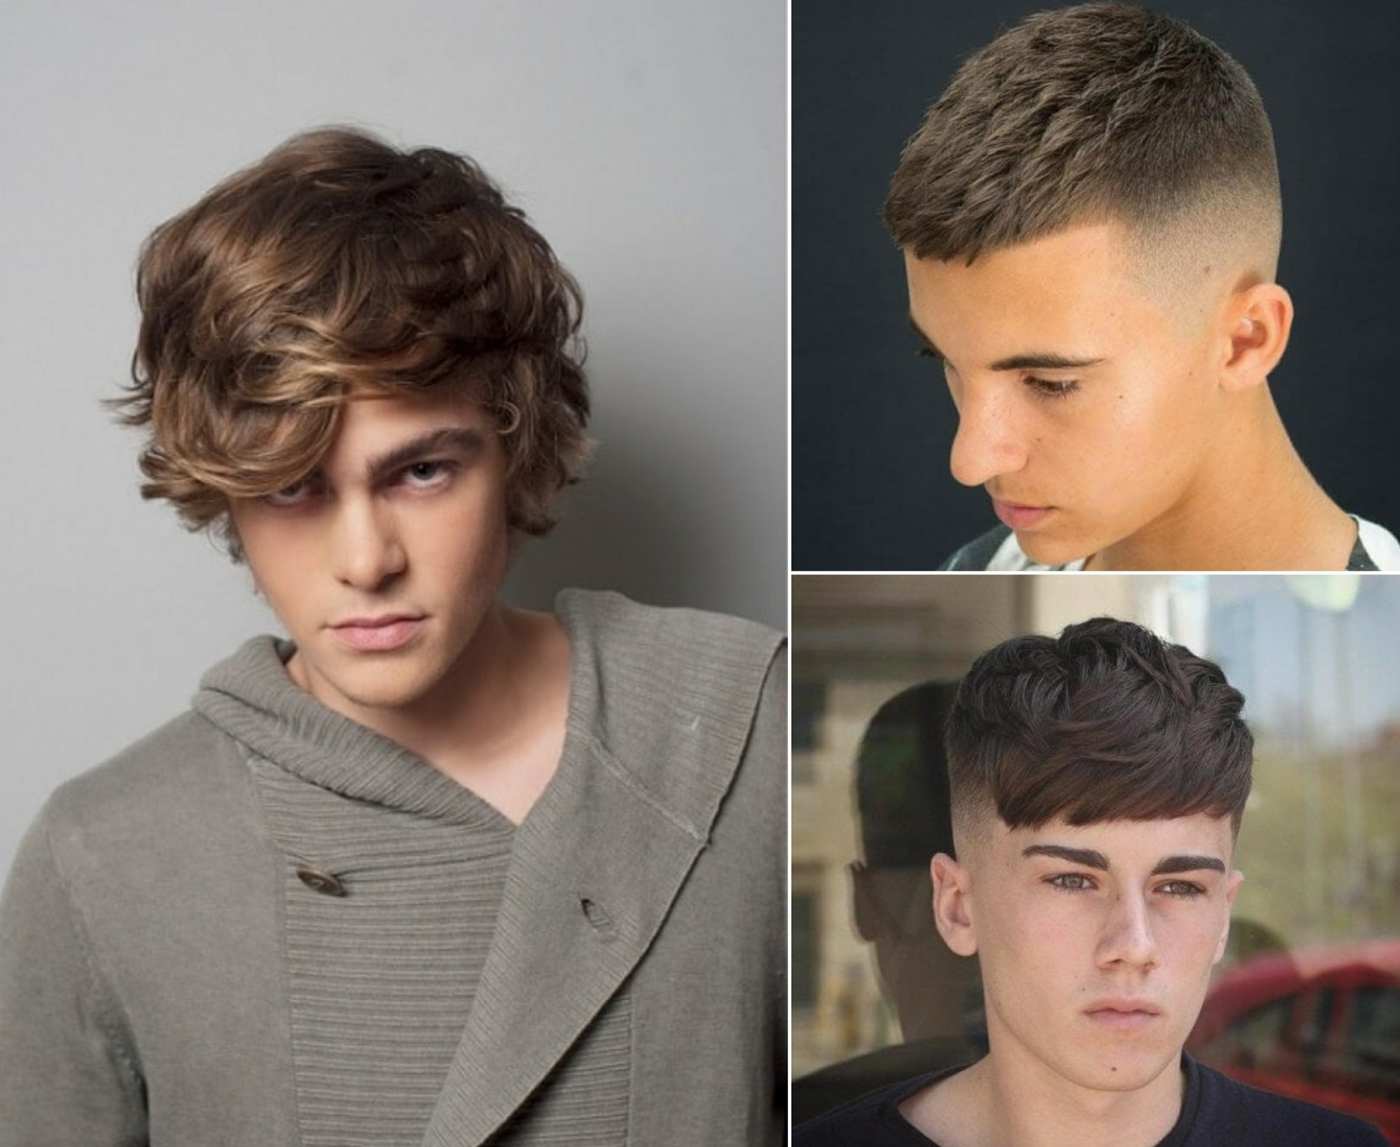 Hairstyles for boys from 12 - Ideas for long, medium and short hair